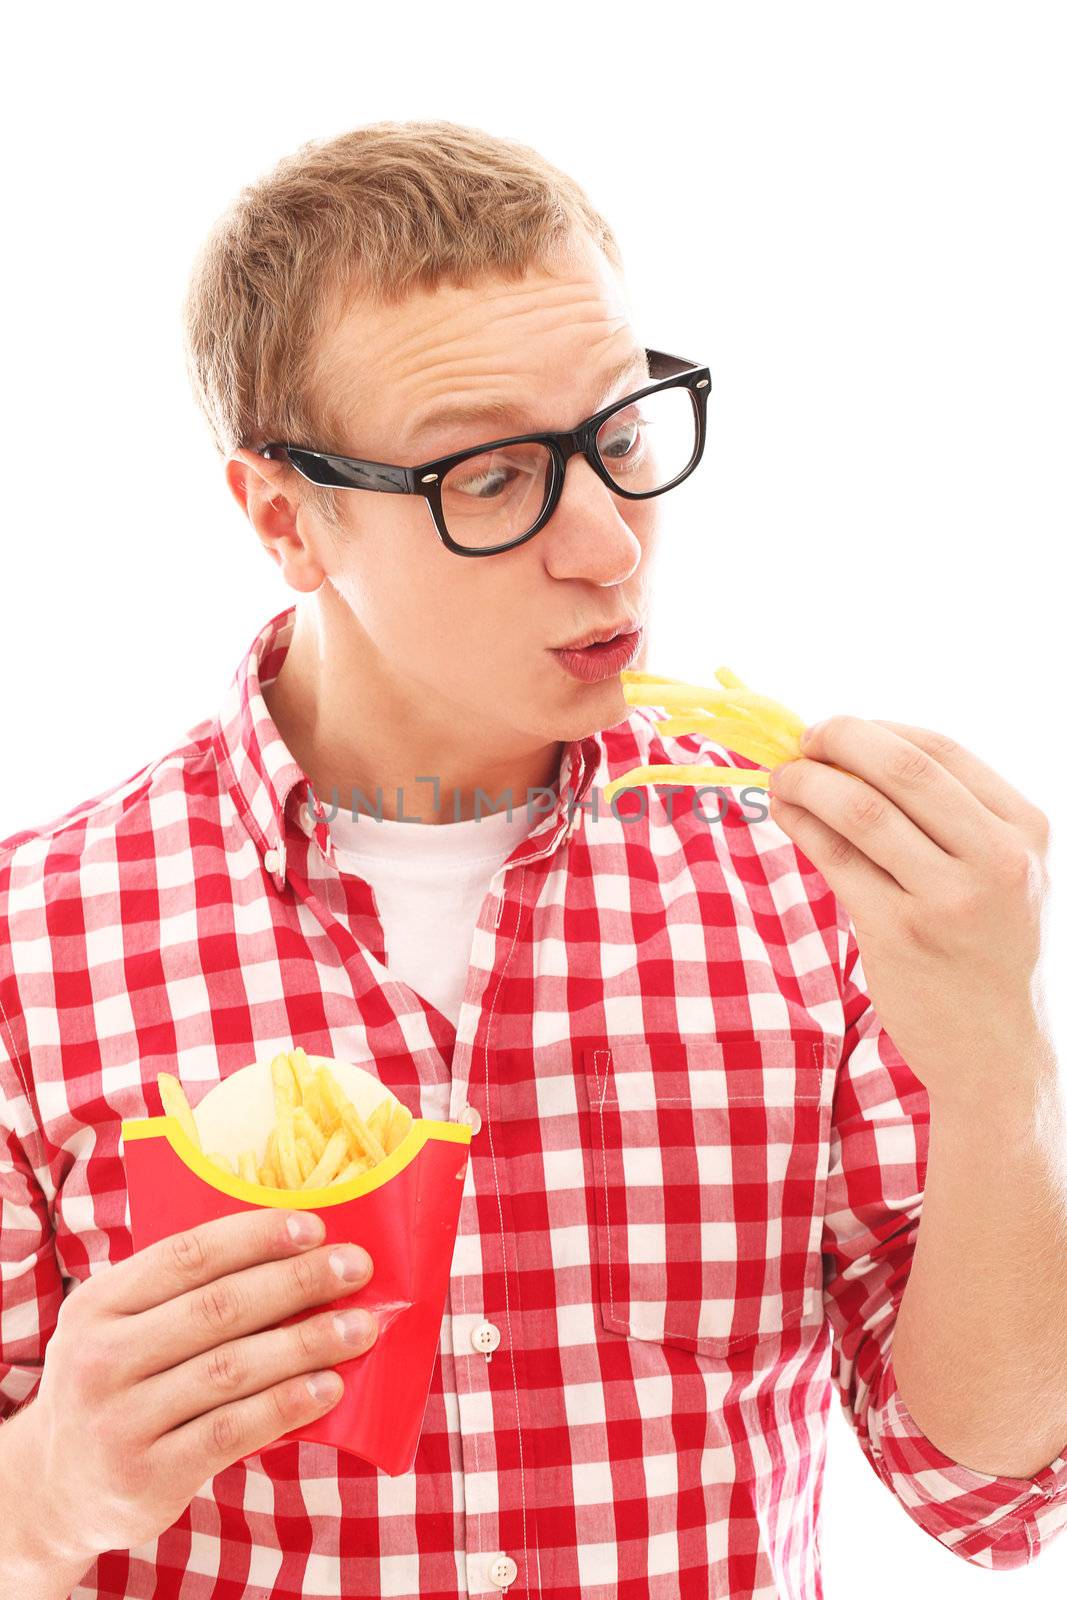 Funny man in glasses with crisp french fries and hamburger